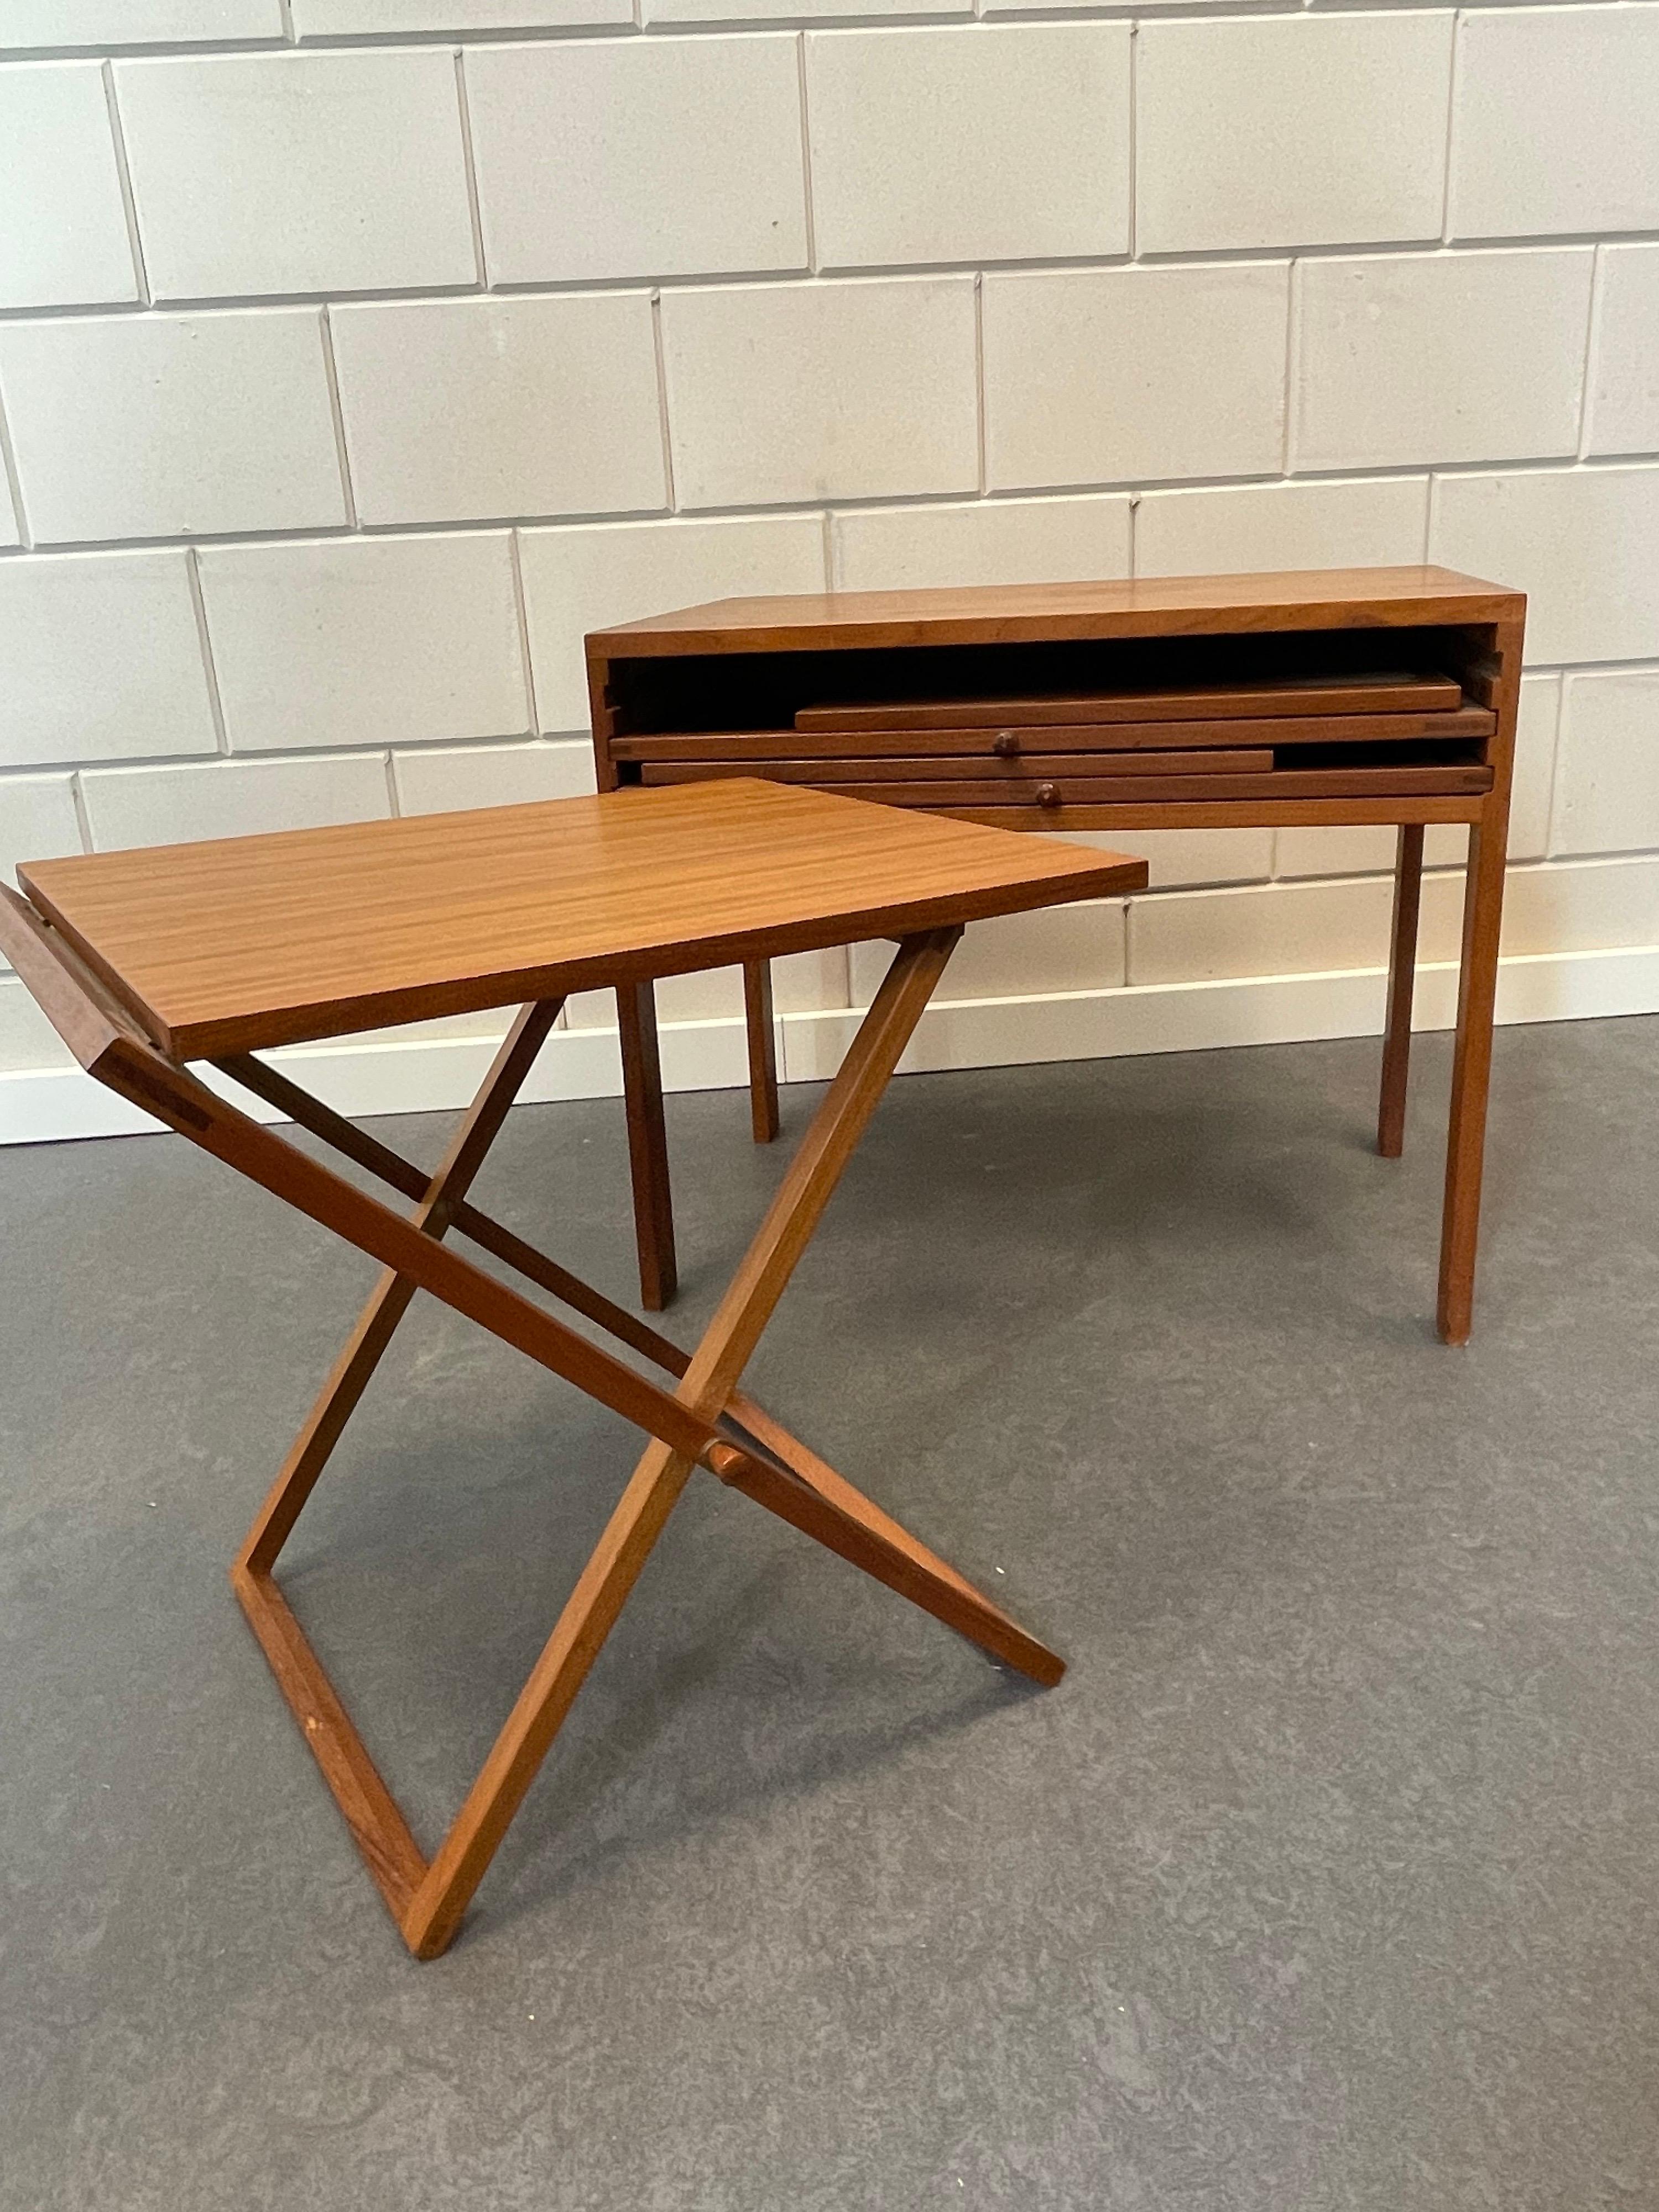 Illum Wikkelsø is the Danish designer of this unique set of nesting tables.
It is the complete and original set of three folding tables in teak. Three tables that nest into an occasional table. The manufacturer’s label is at the bottom CFC